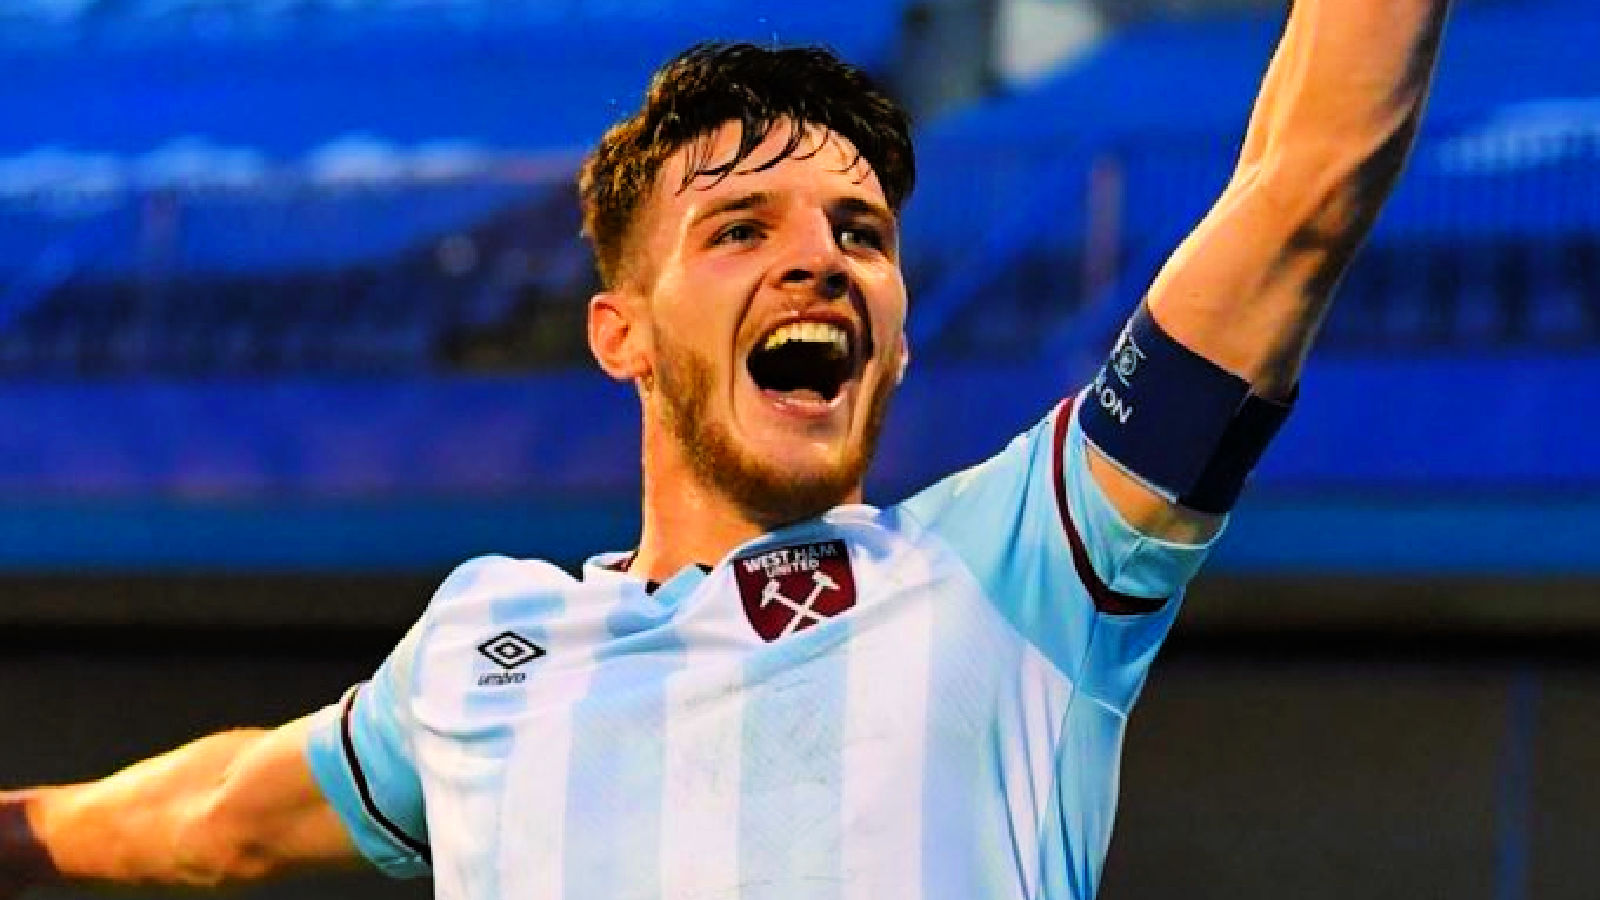 Unbelievable Europa League goals from Declan Rice, Victor Osimhen, and Thomas Strakosha take Twitter by storm